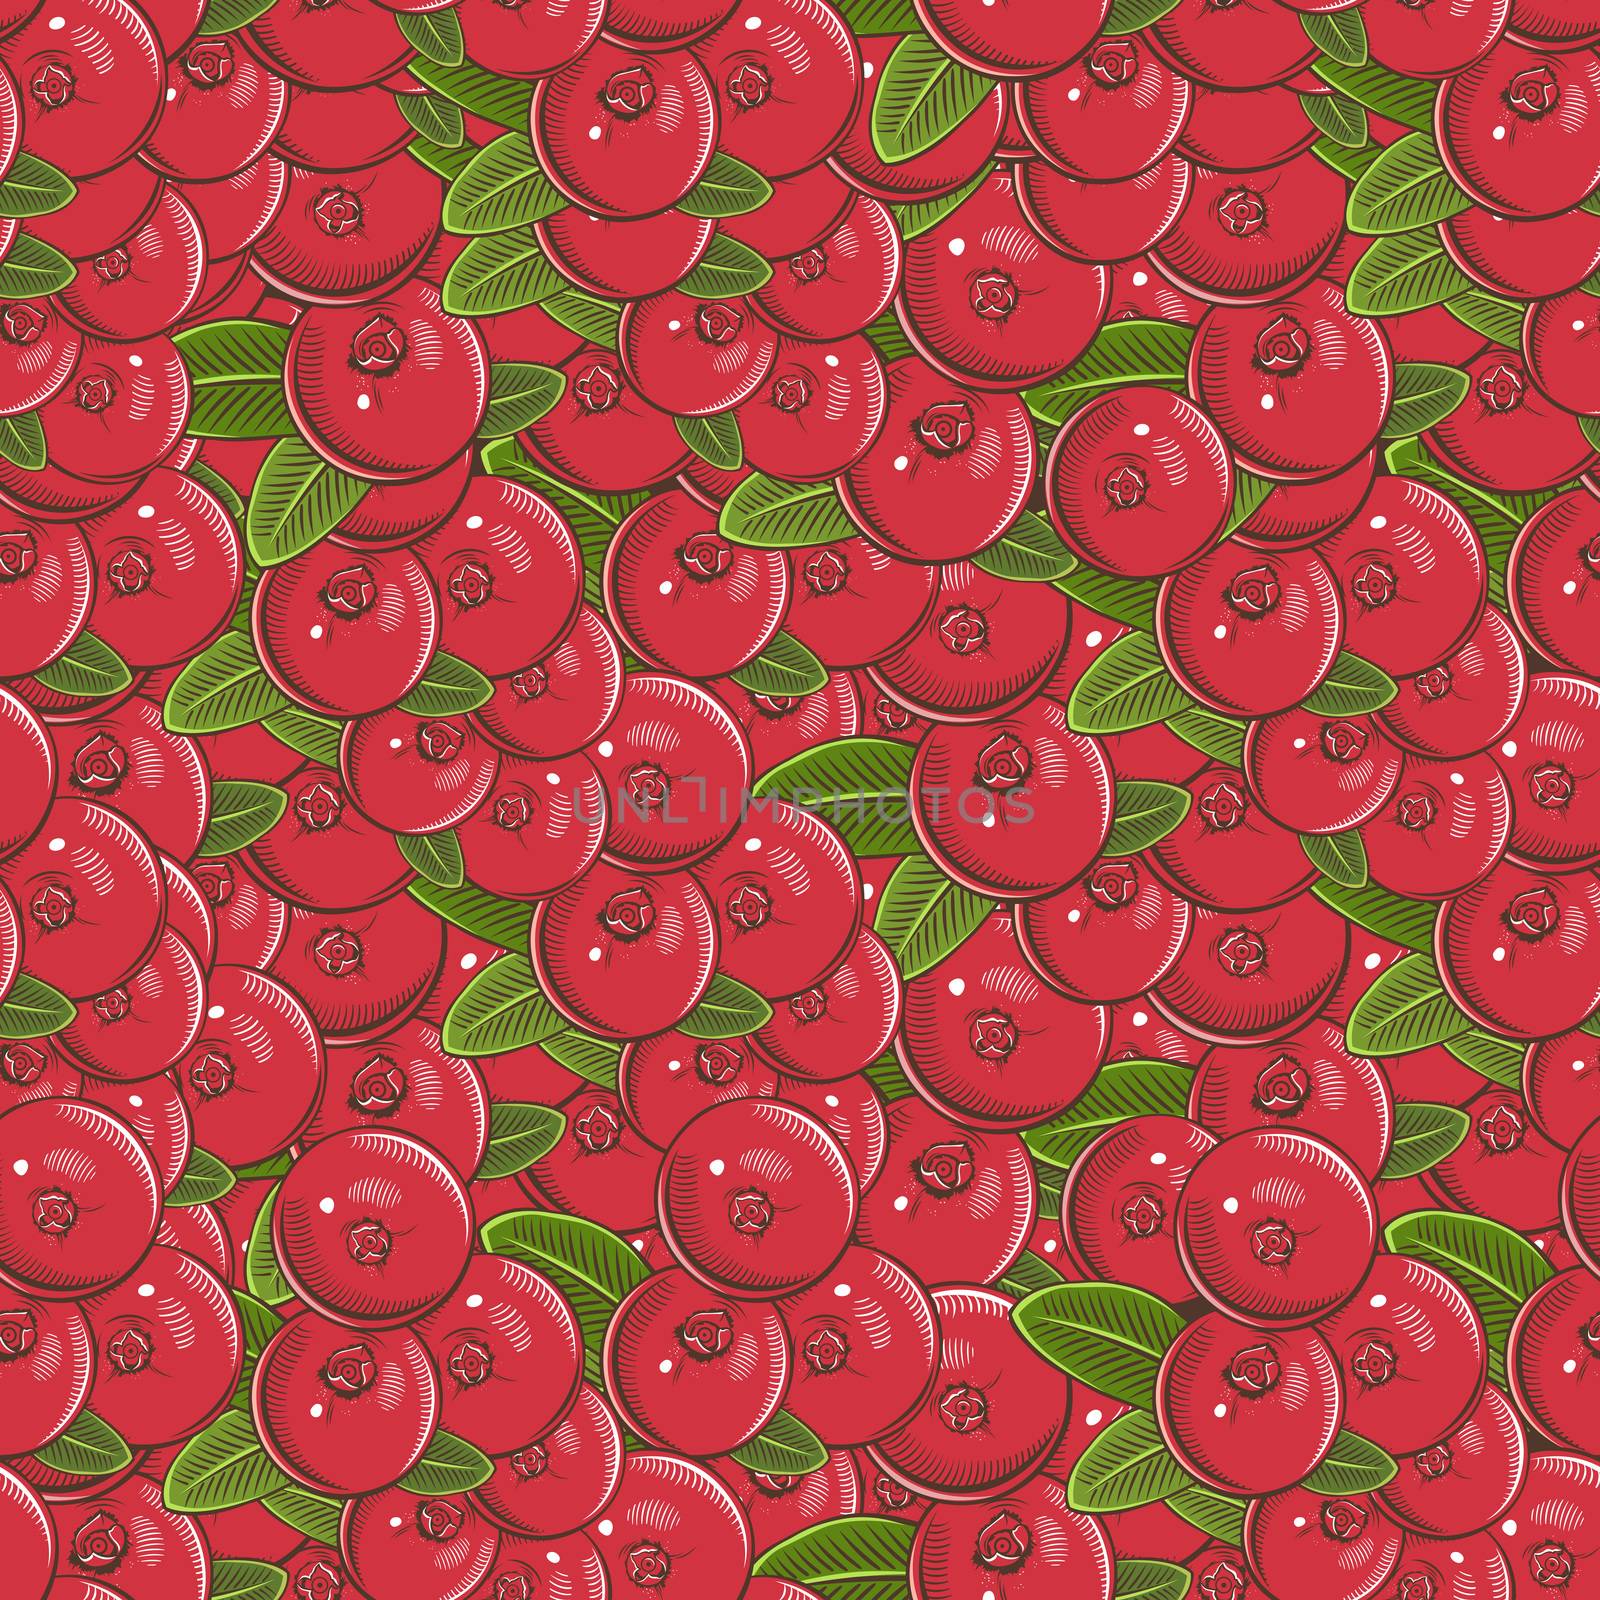 Vintage Cranberry Seamless Pattern by ConceptCafe